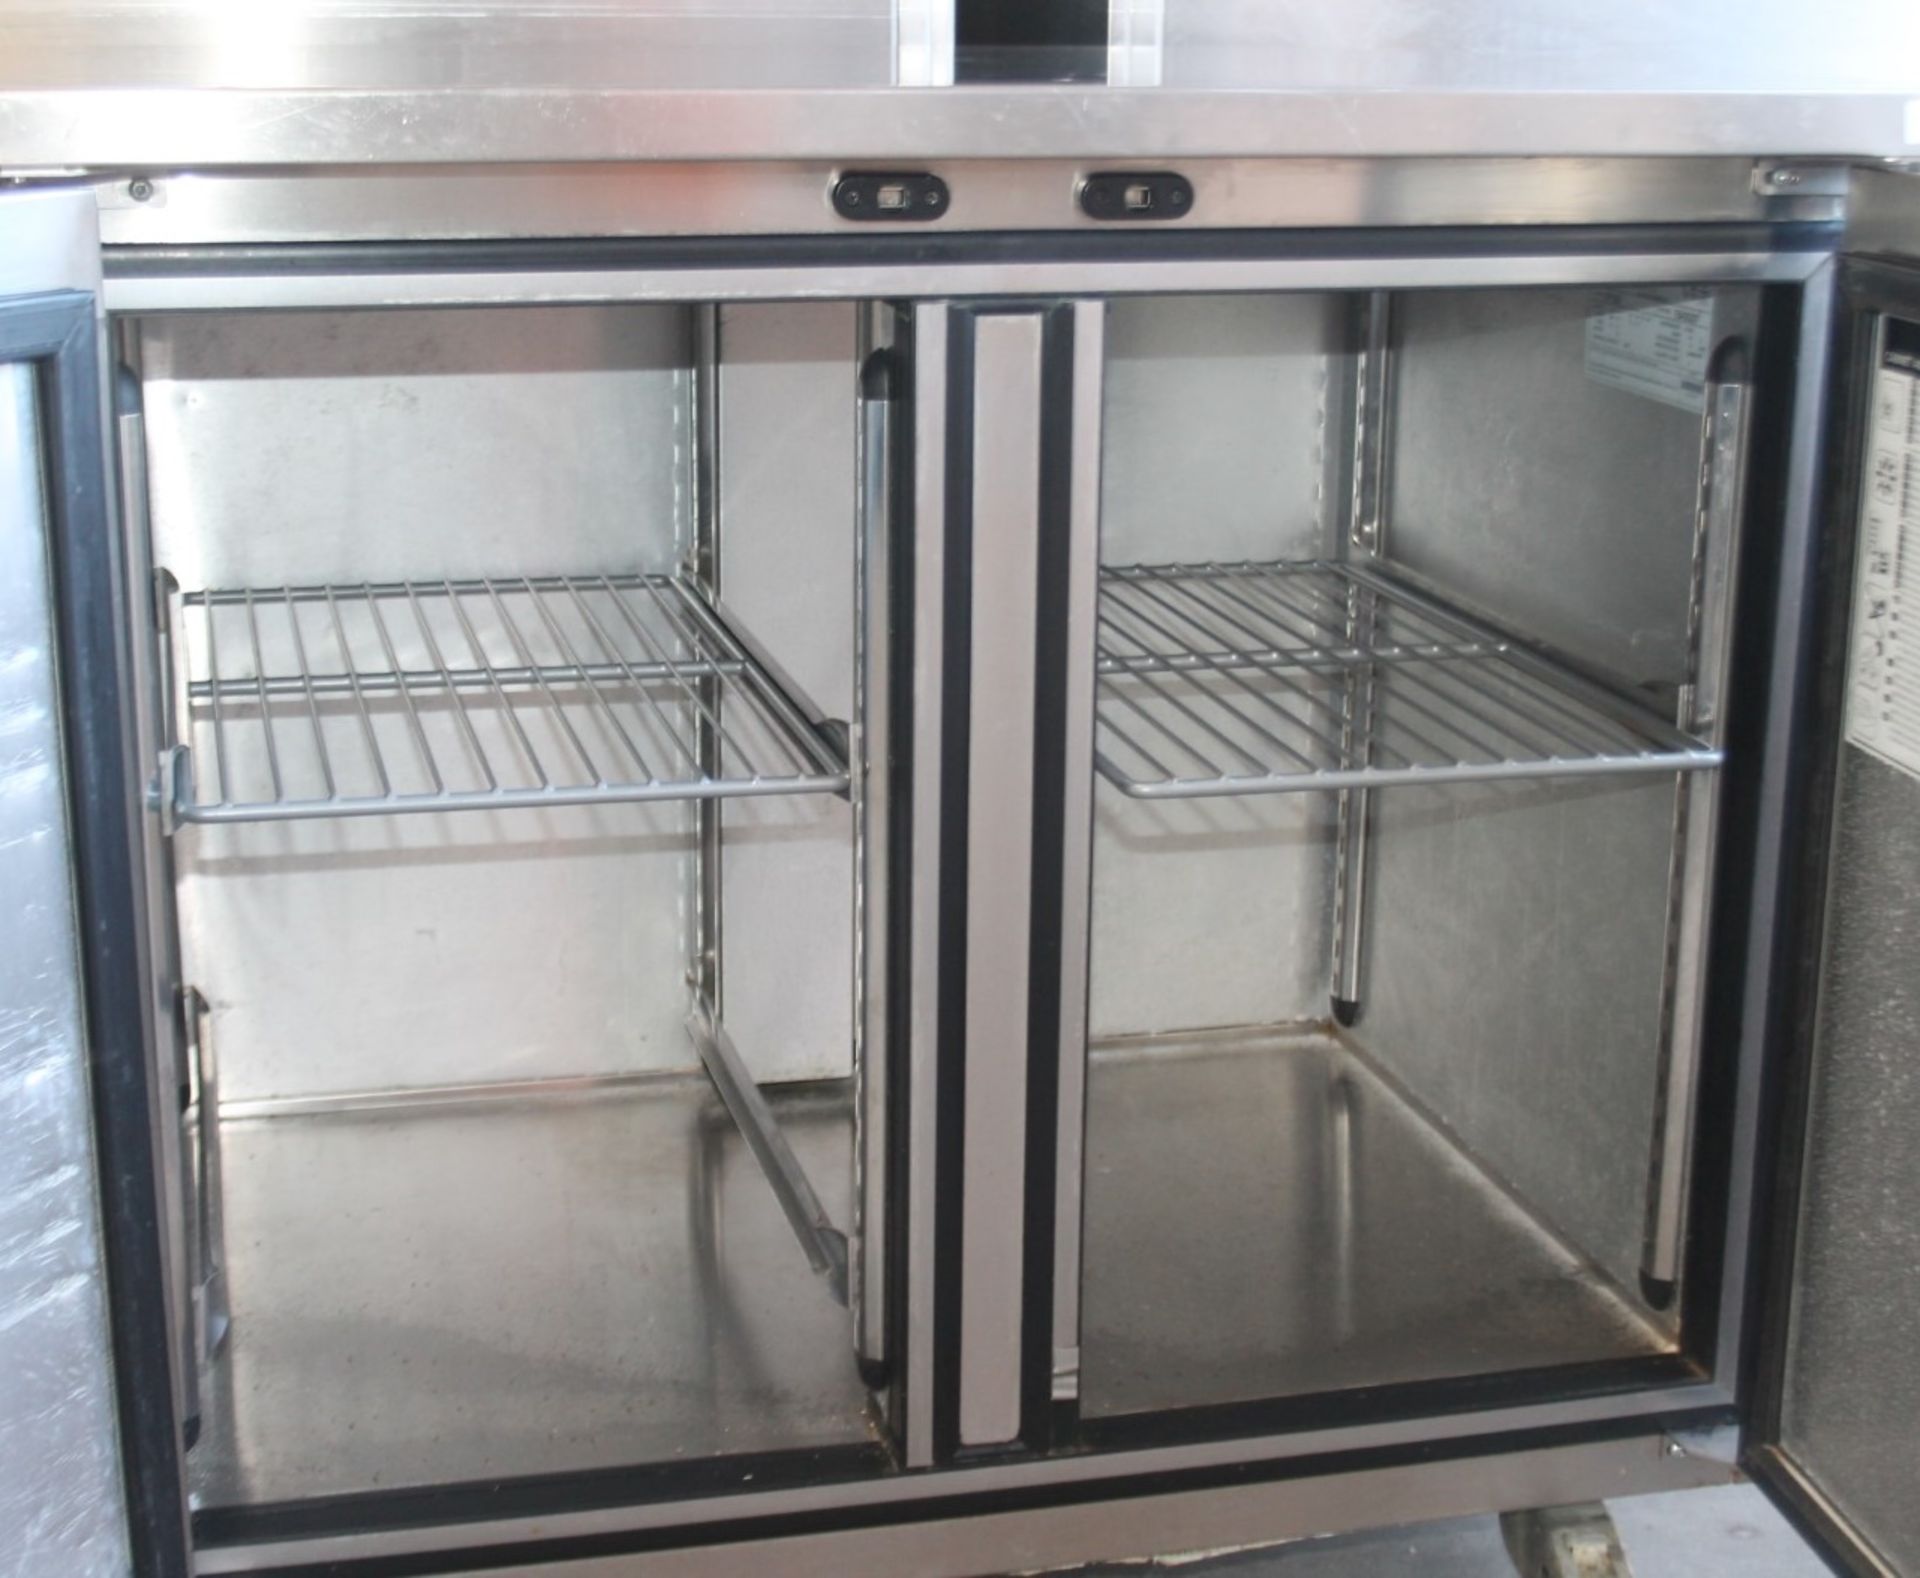 1 x Fosters EcoPro G2 2-Door Commercial Refrigerated Counter - Ref: GEN585 WH2 - CL802 UX - Image 4 of 4